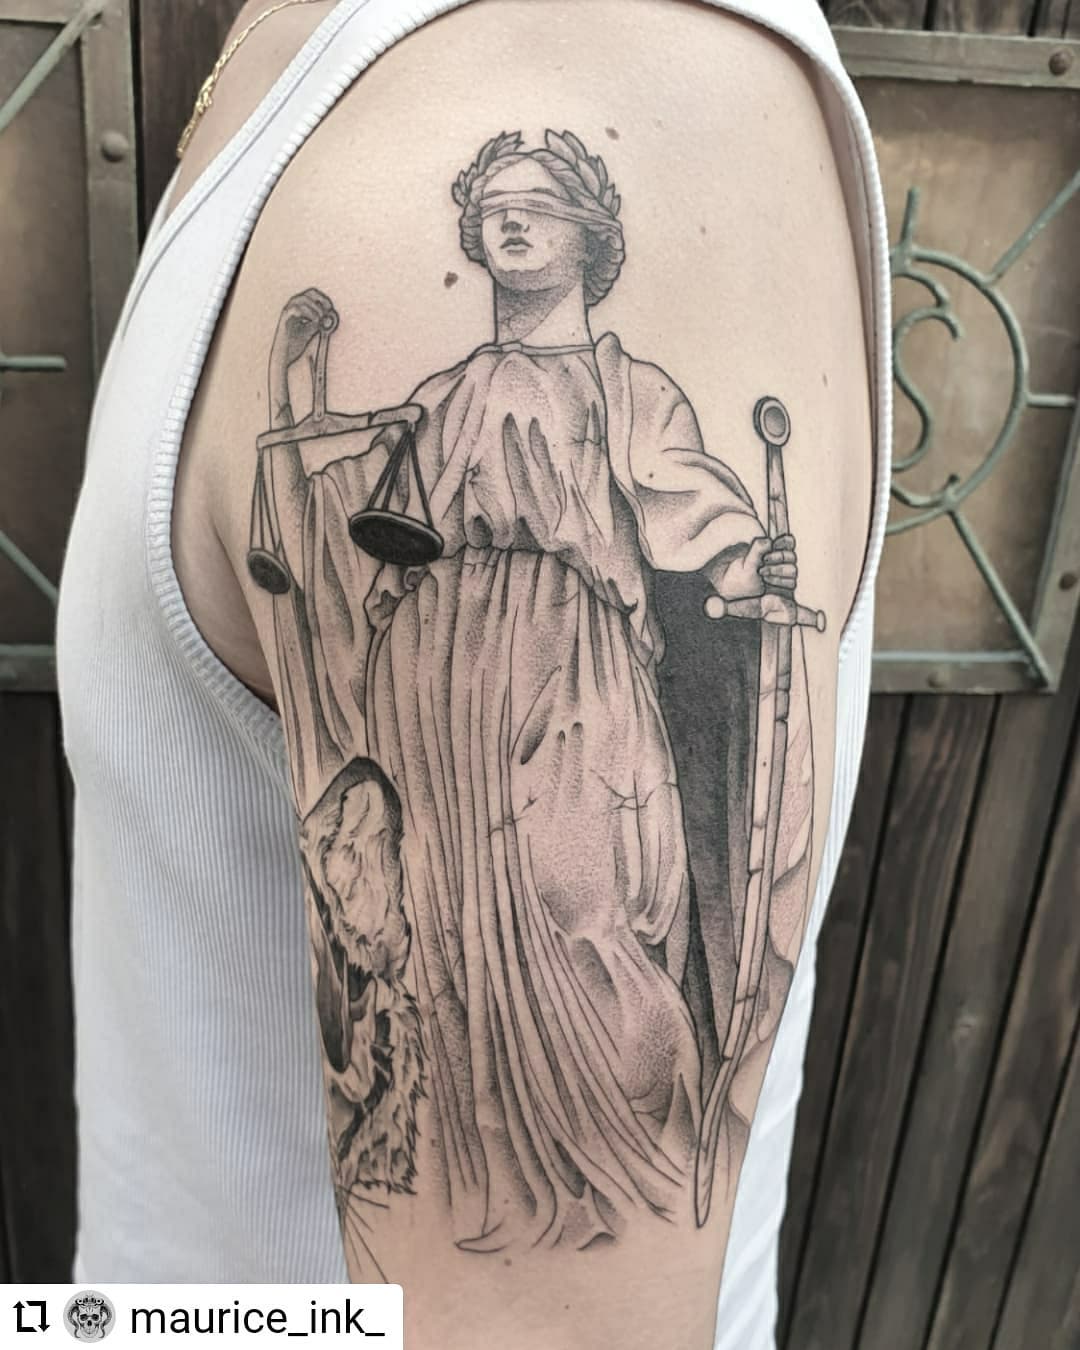 Neu von @maurice_ink_
...
Fun time with this justitia on @norb.27
.
.
.
.
#justi